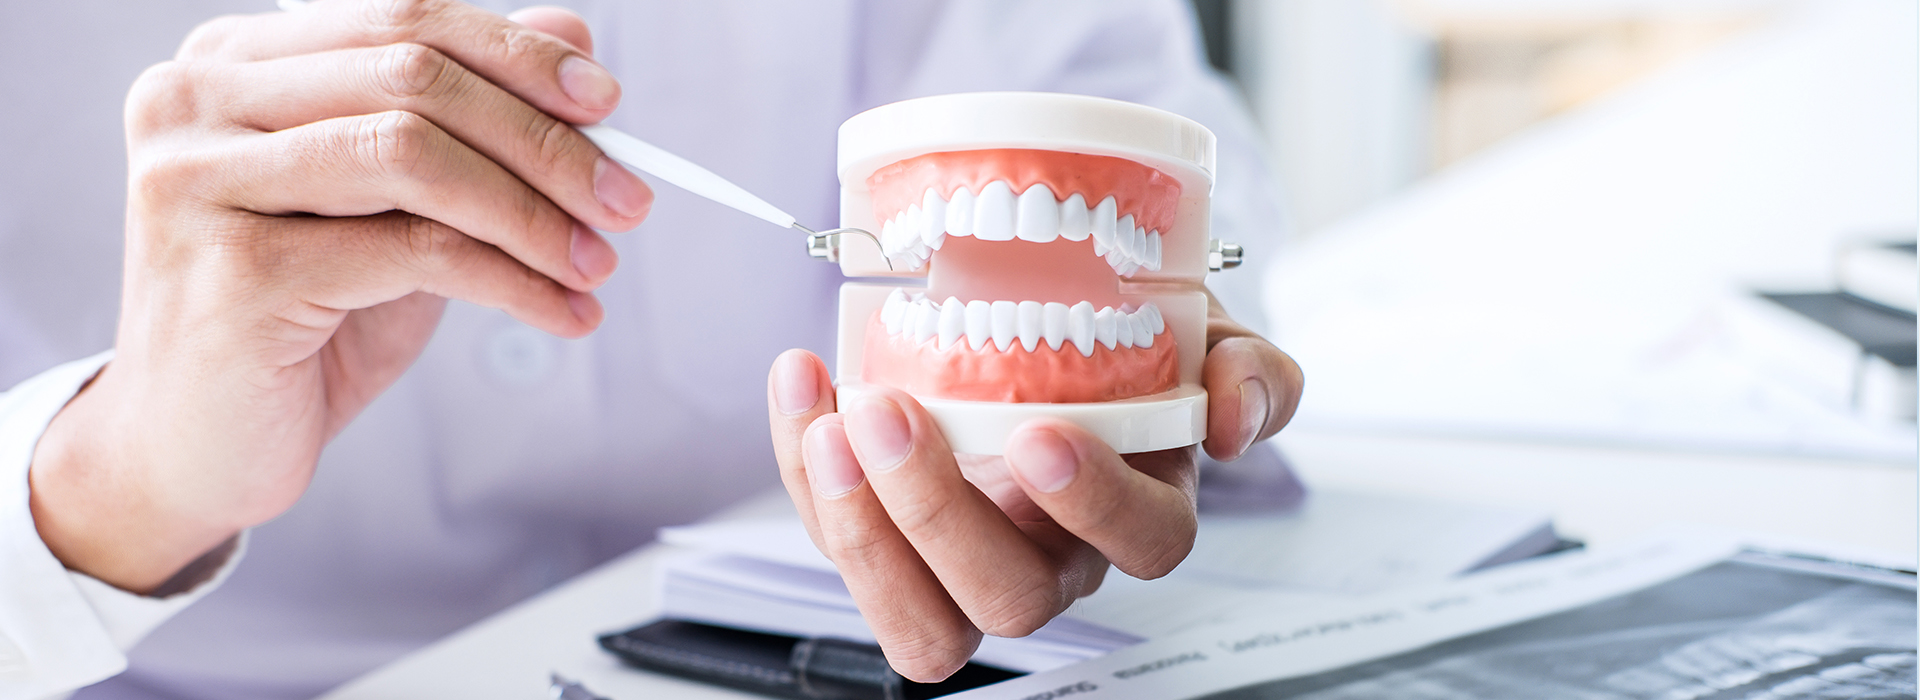 Hanhan Dental | Emergency Treatment, Sports Mouthguards and Oral Cancer Screening